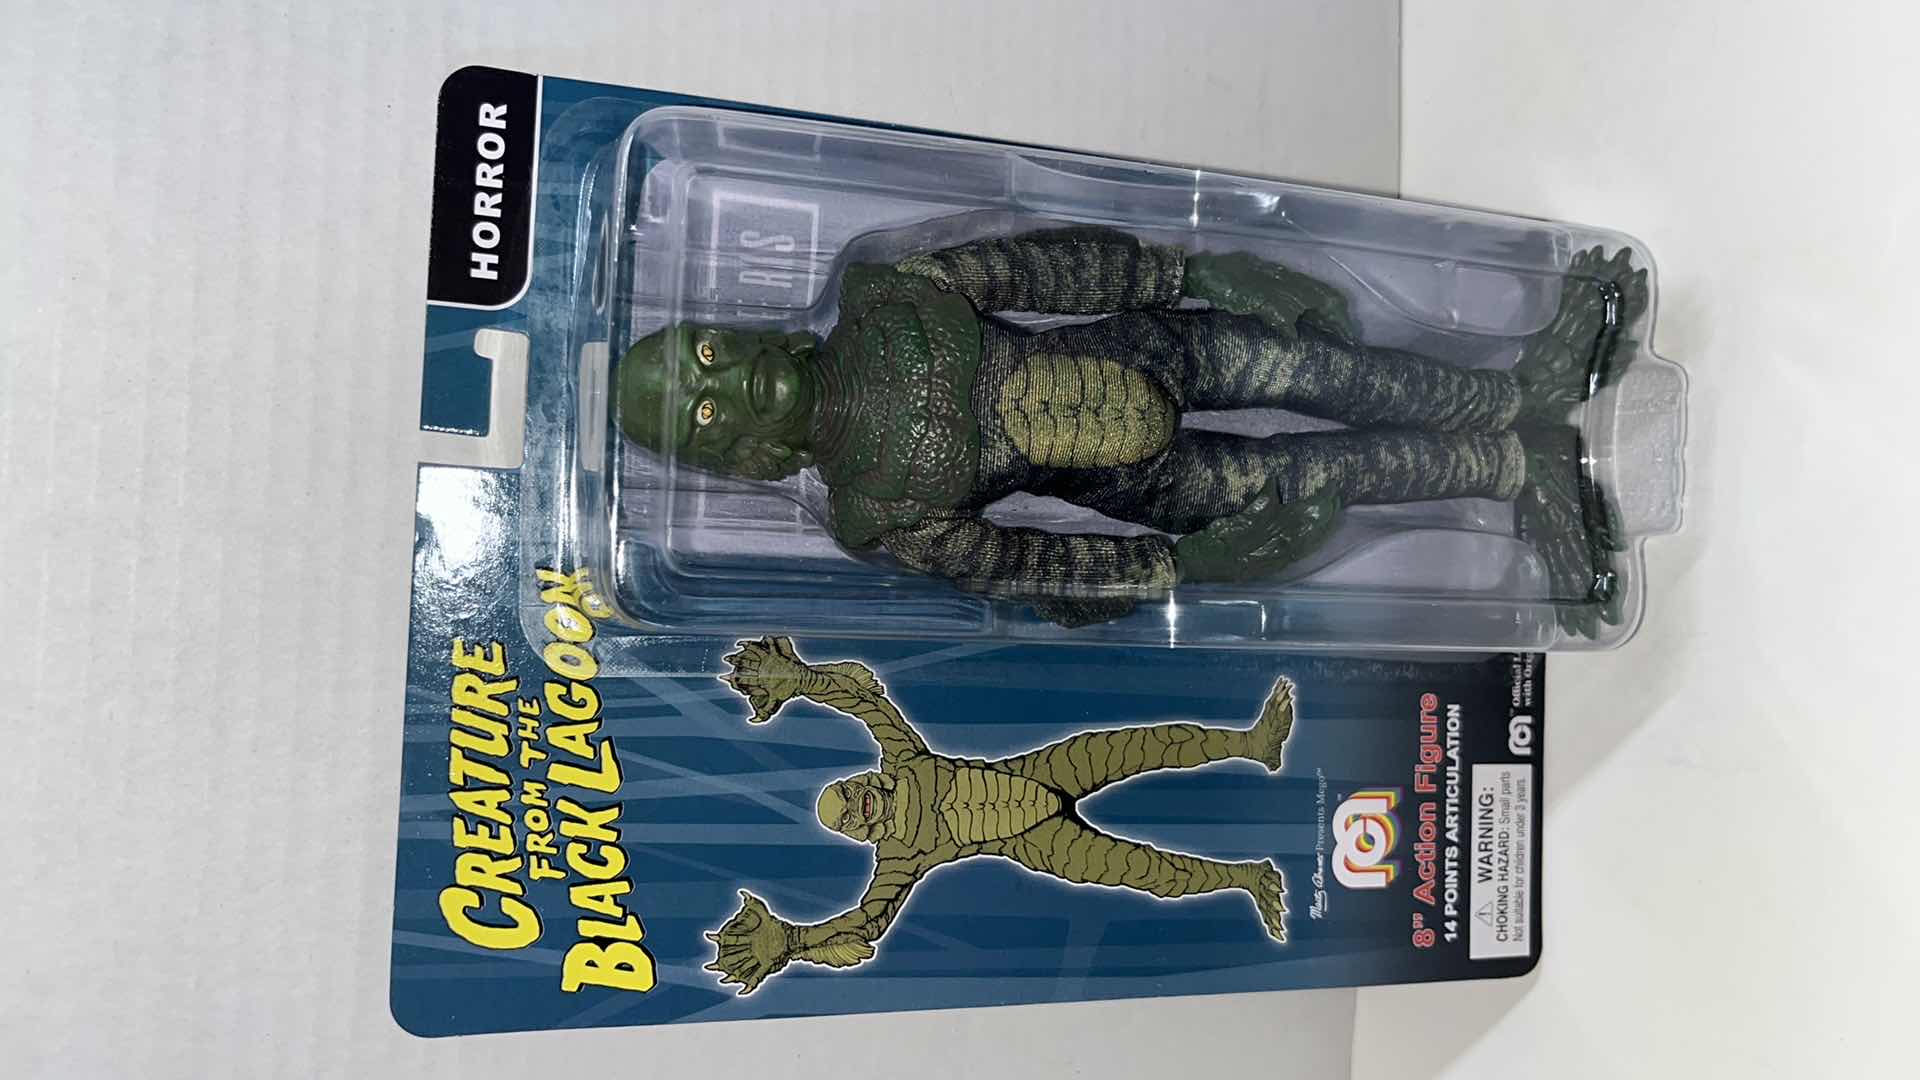 Photo 2 of NIB WORLDS GREATEST MEGO MONSTERS 8” ACTION FIGURE, CREATURE FROM THE BLACK LAGOON & DR. JEKYLL MR. HYDE (2)